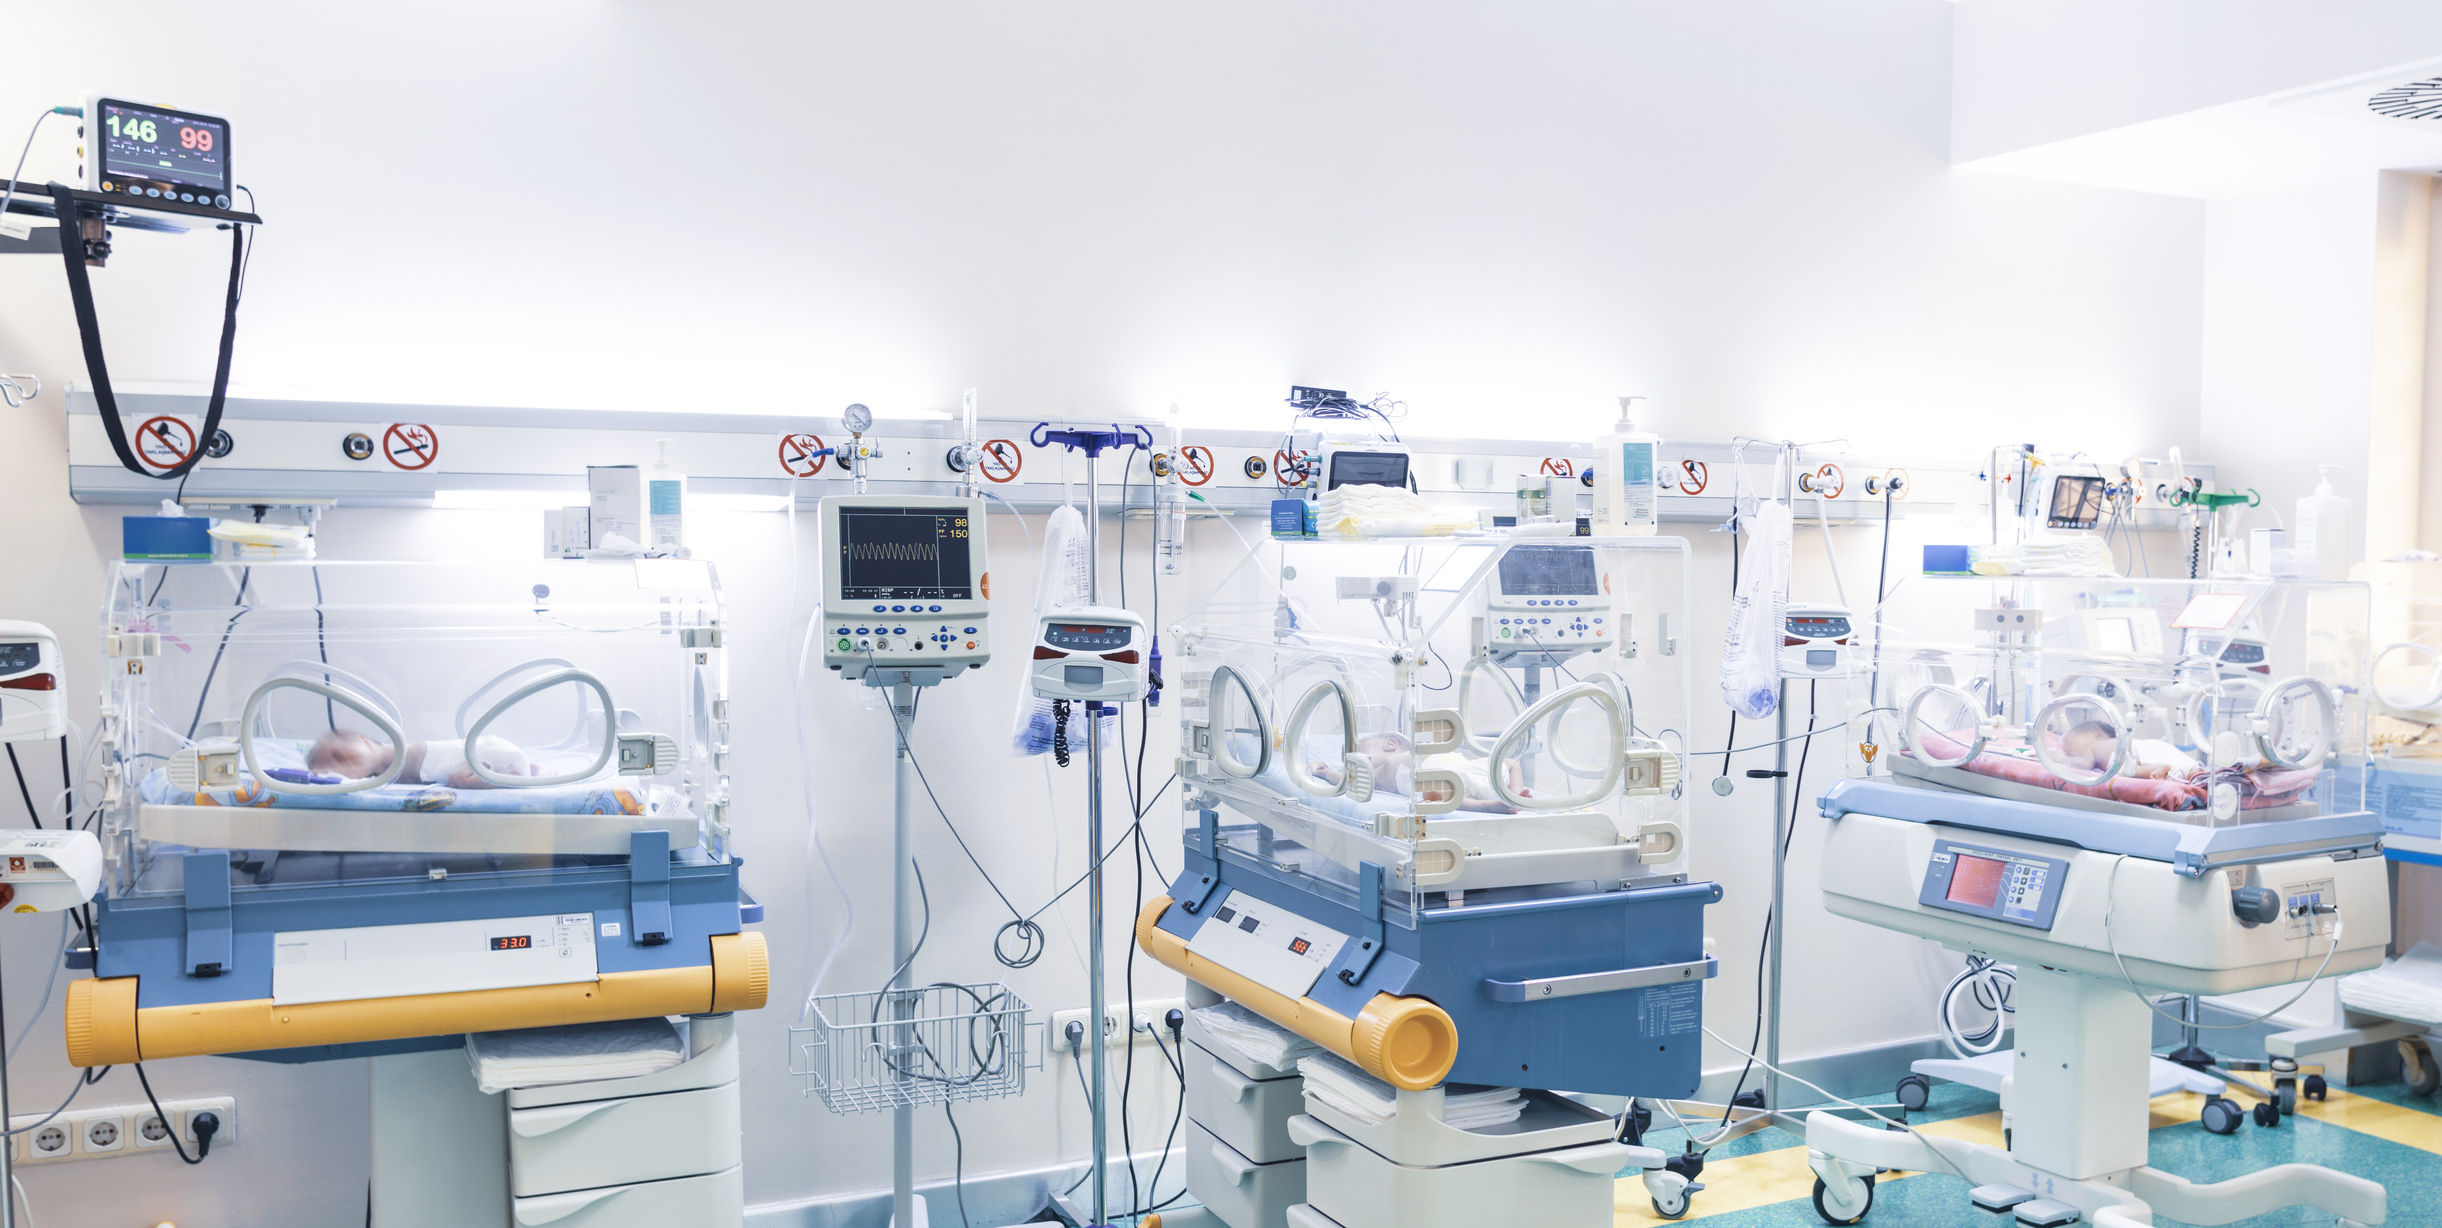 Newborn babies in incubators in a neonatal intensive care unit, surrounded by medical equipment and monitors